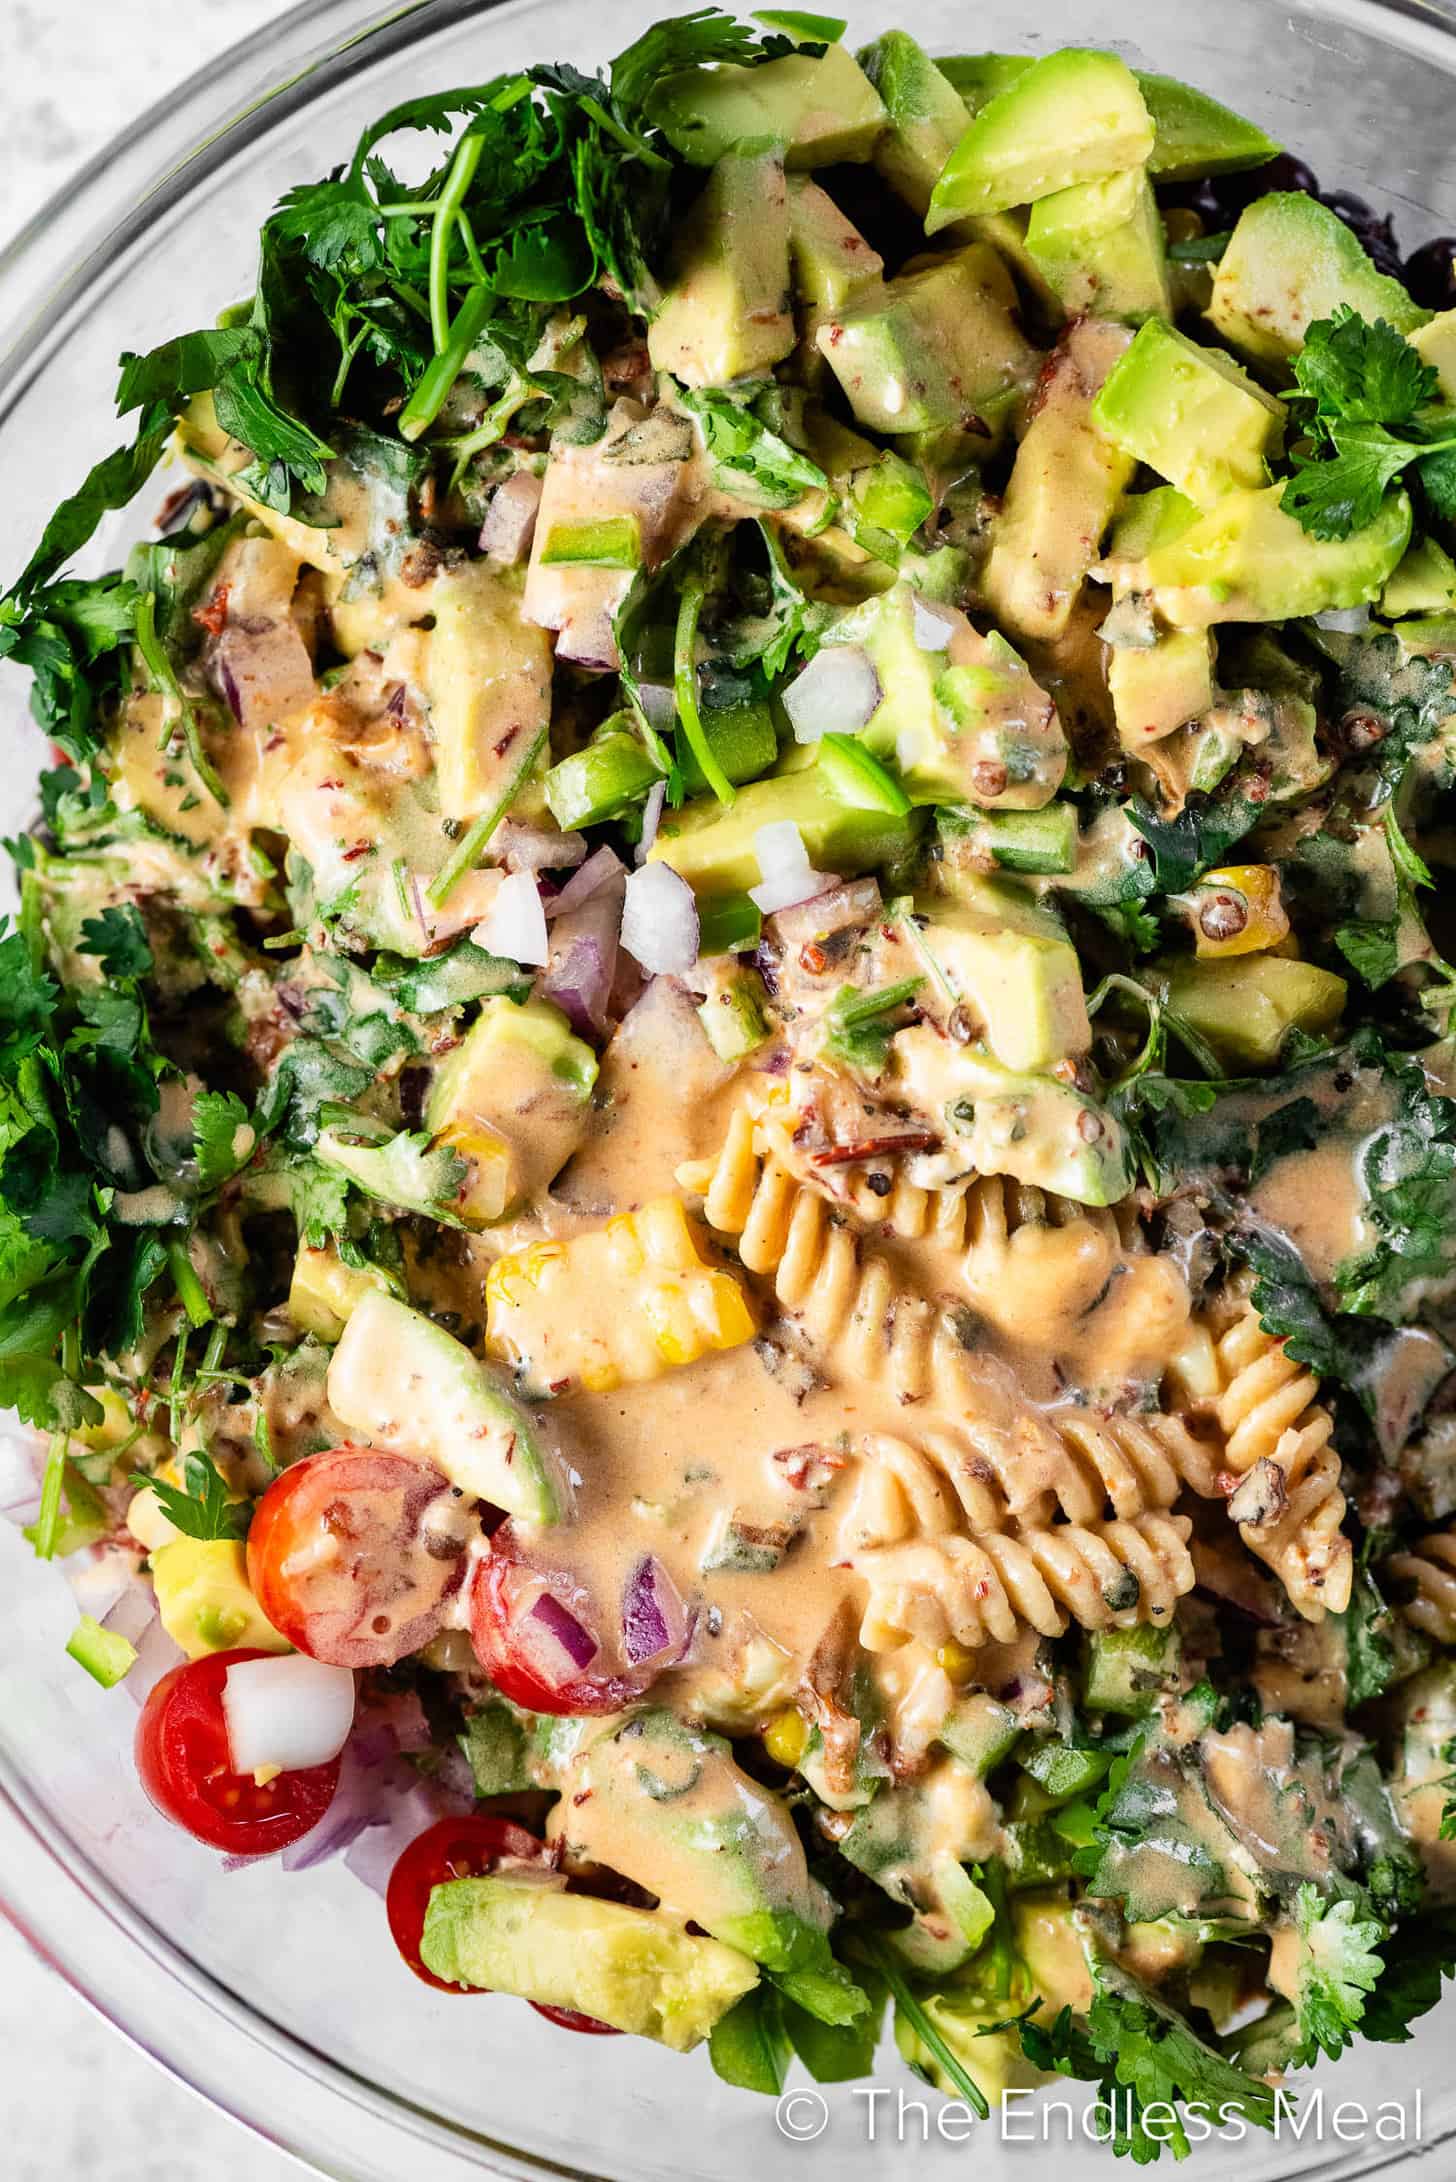 Chipotle dressing poured over Mexican Pasta Salad